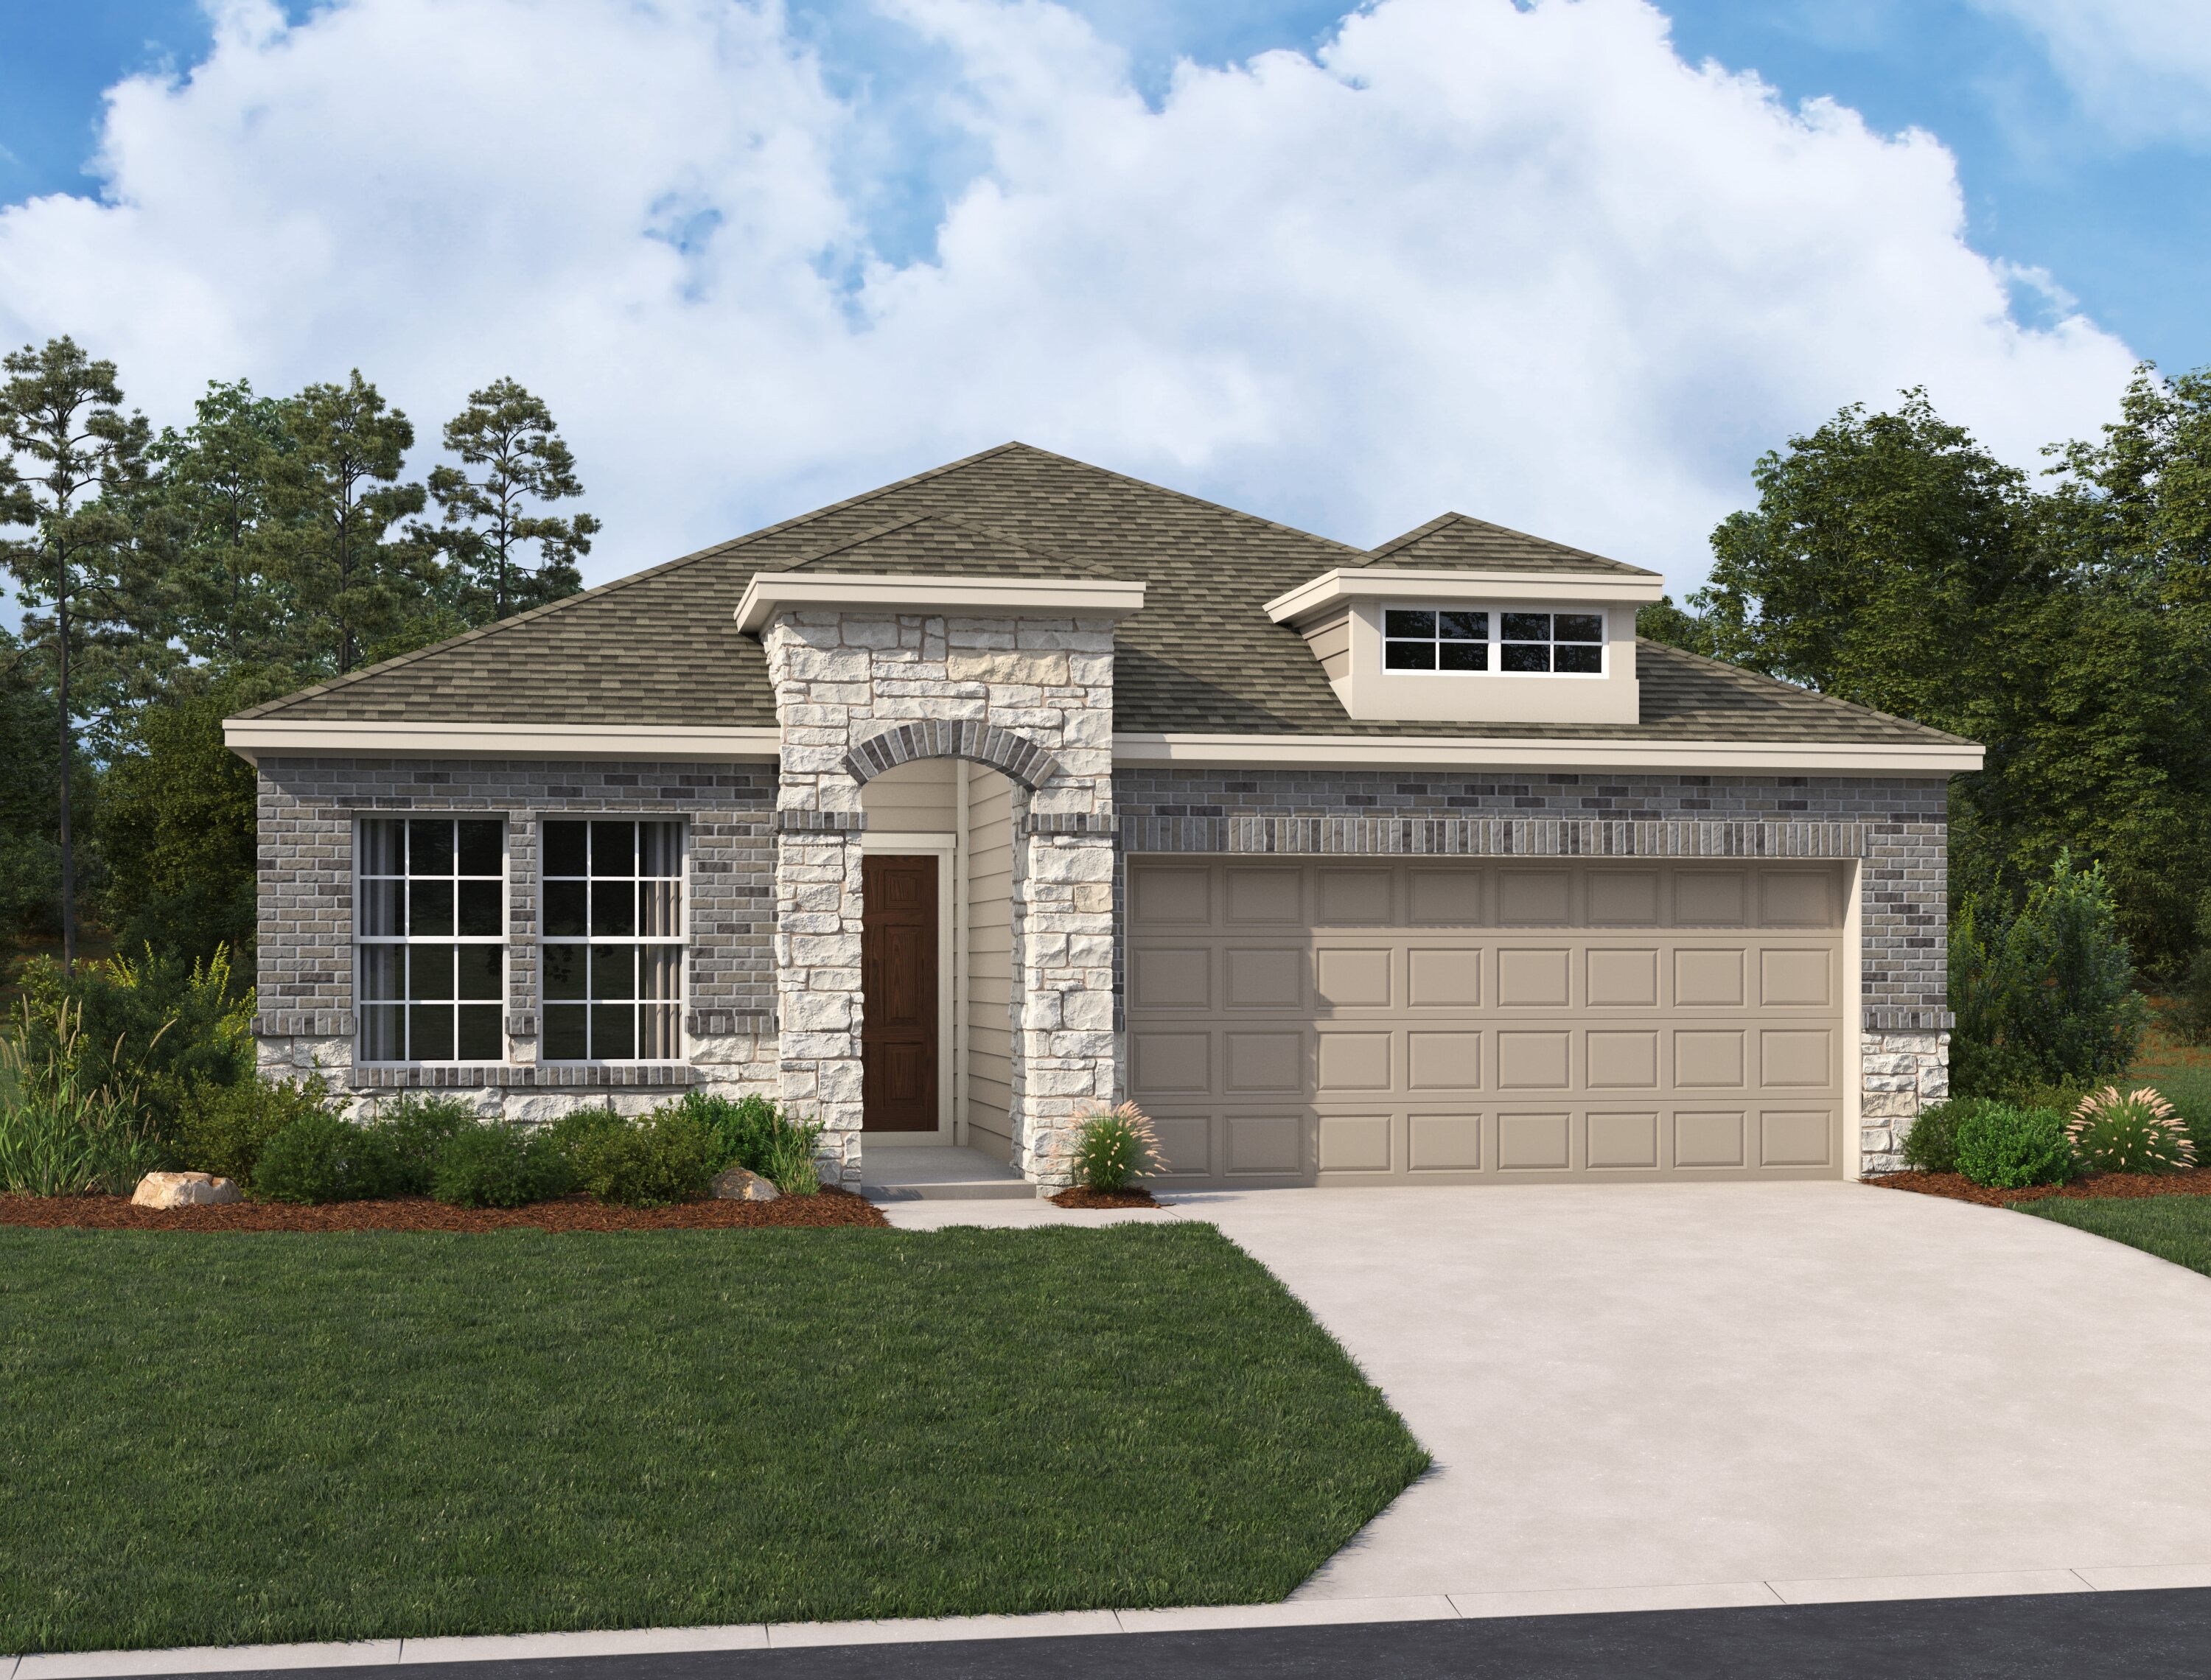 Prism New Home Plan for Enclave at Hennersby Hollow in San Antonio ...